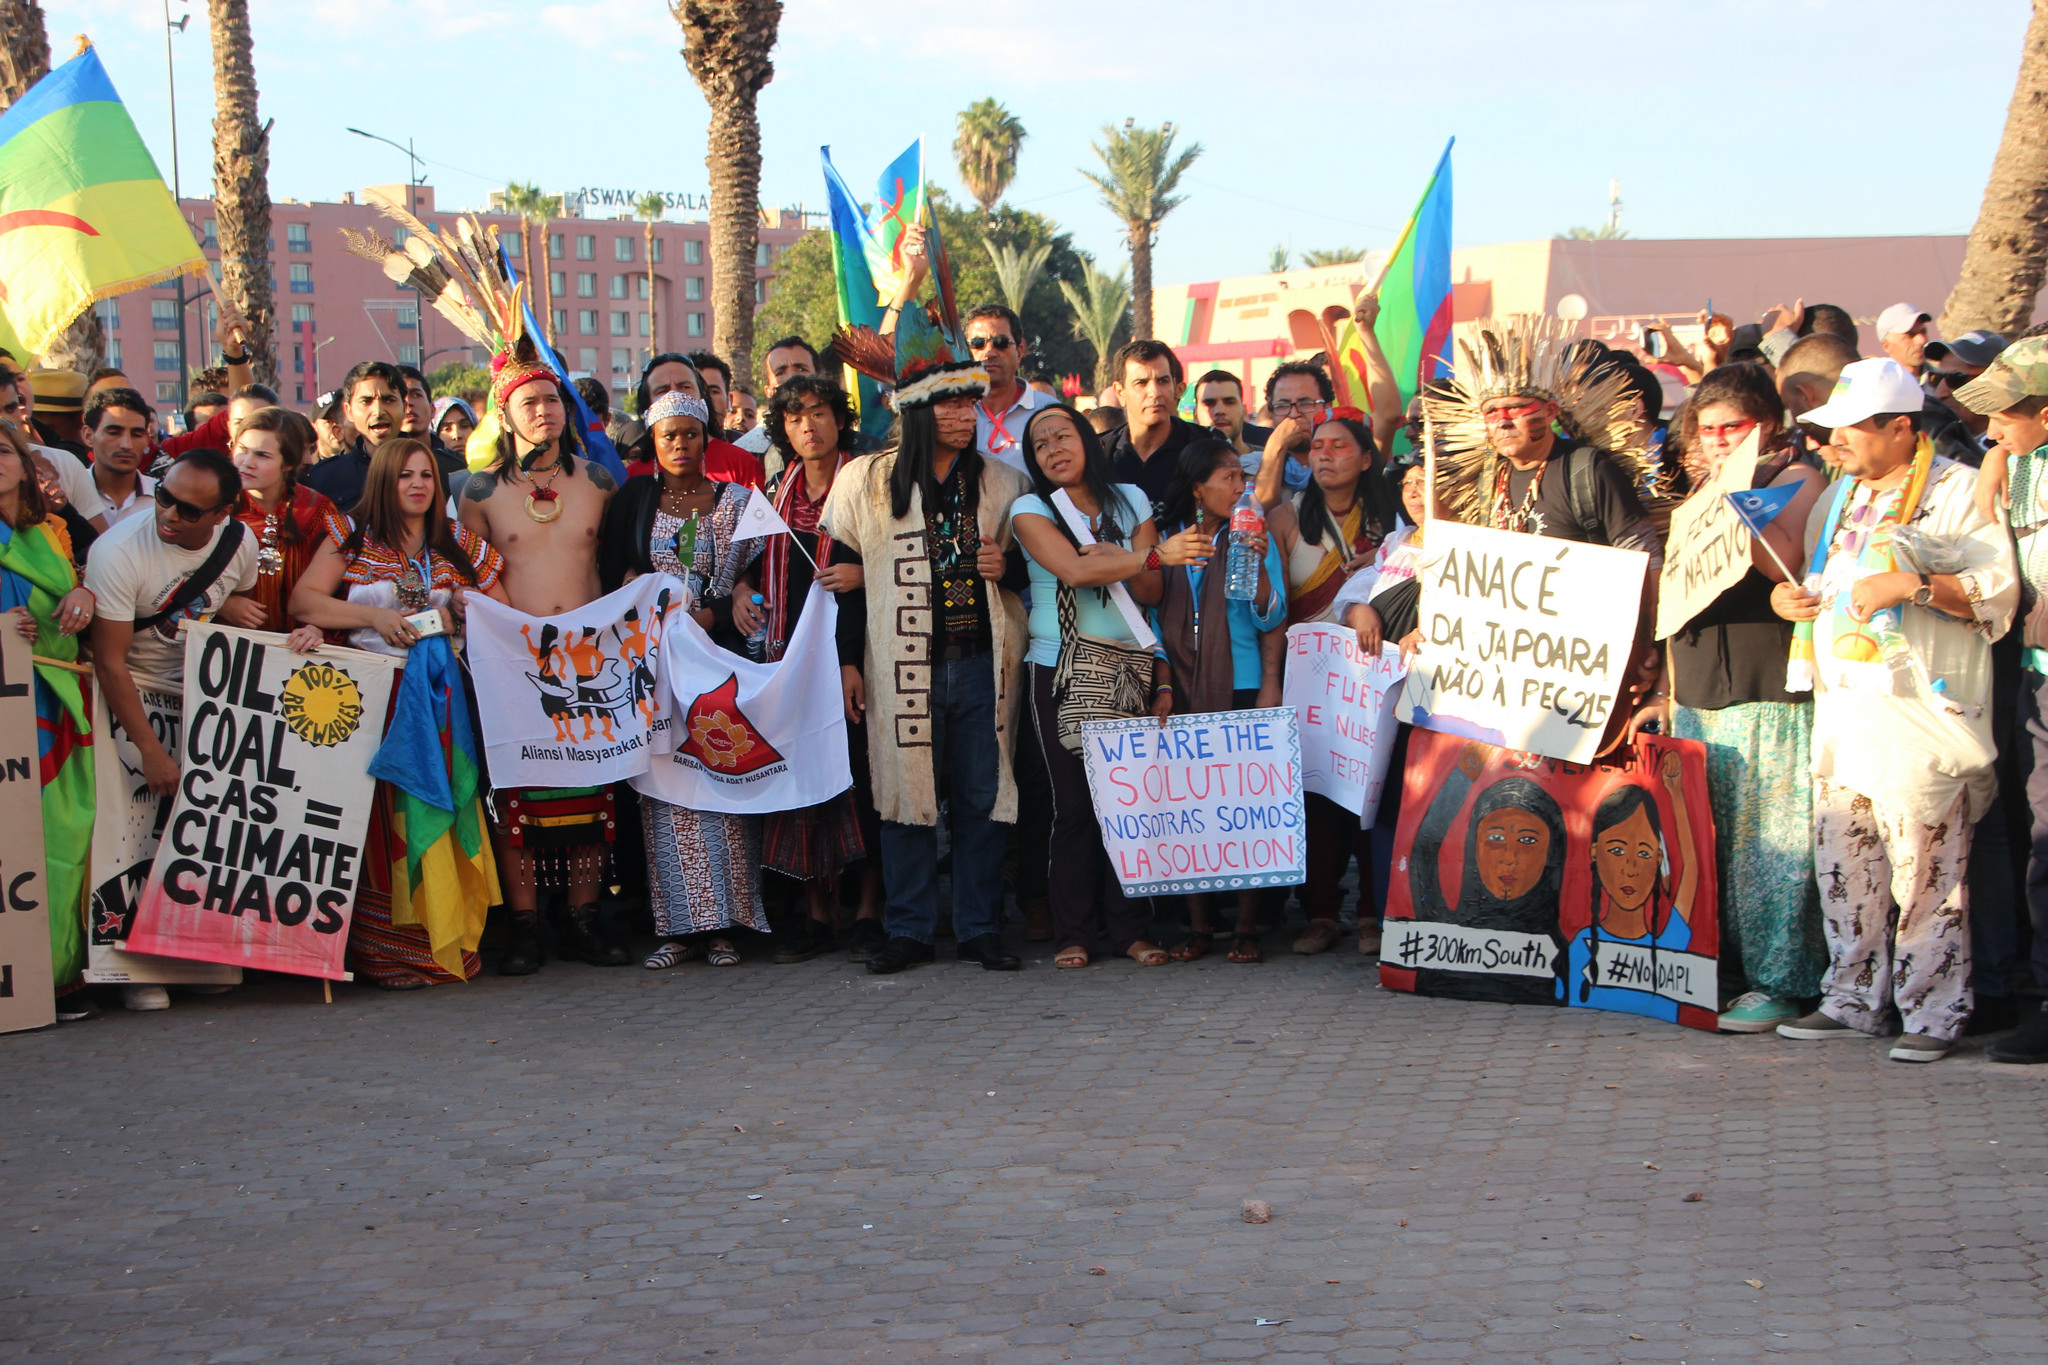 Thousands troop to the Kasbah as climate talks enter 2nd week